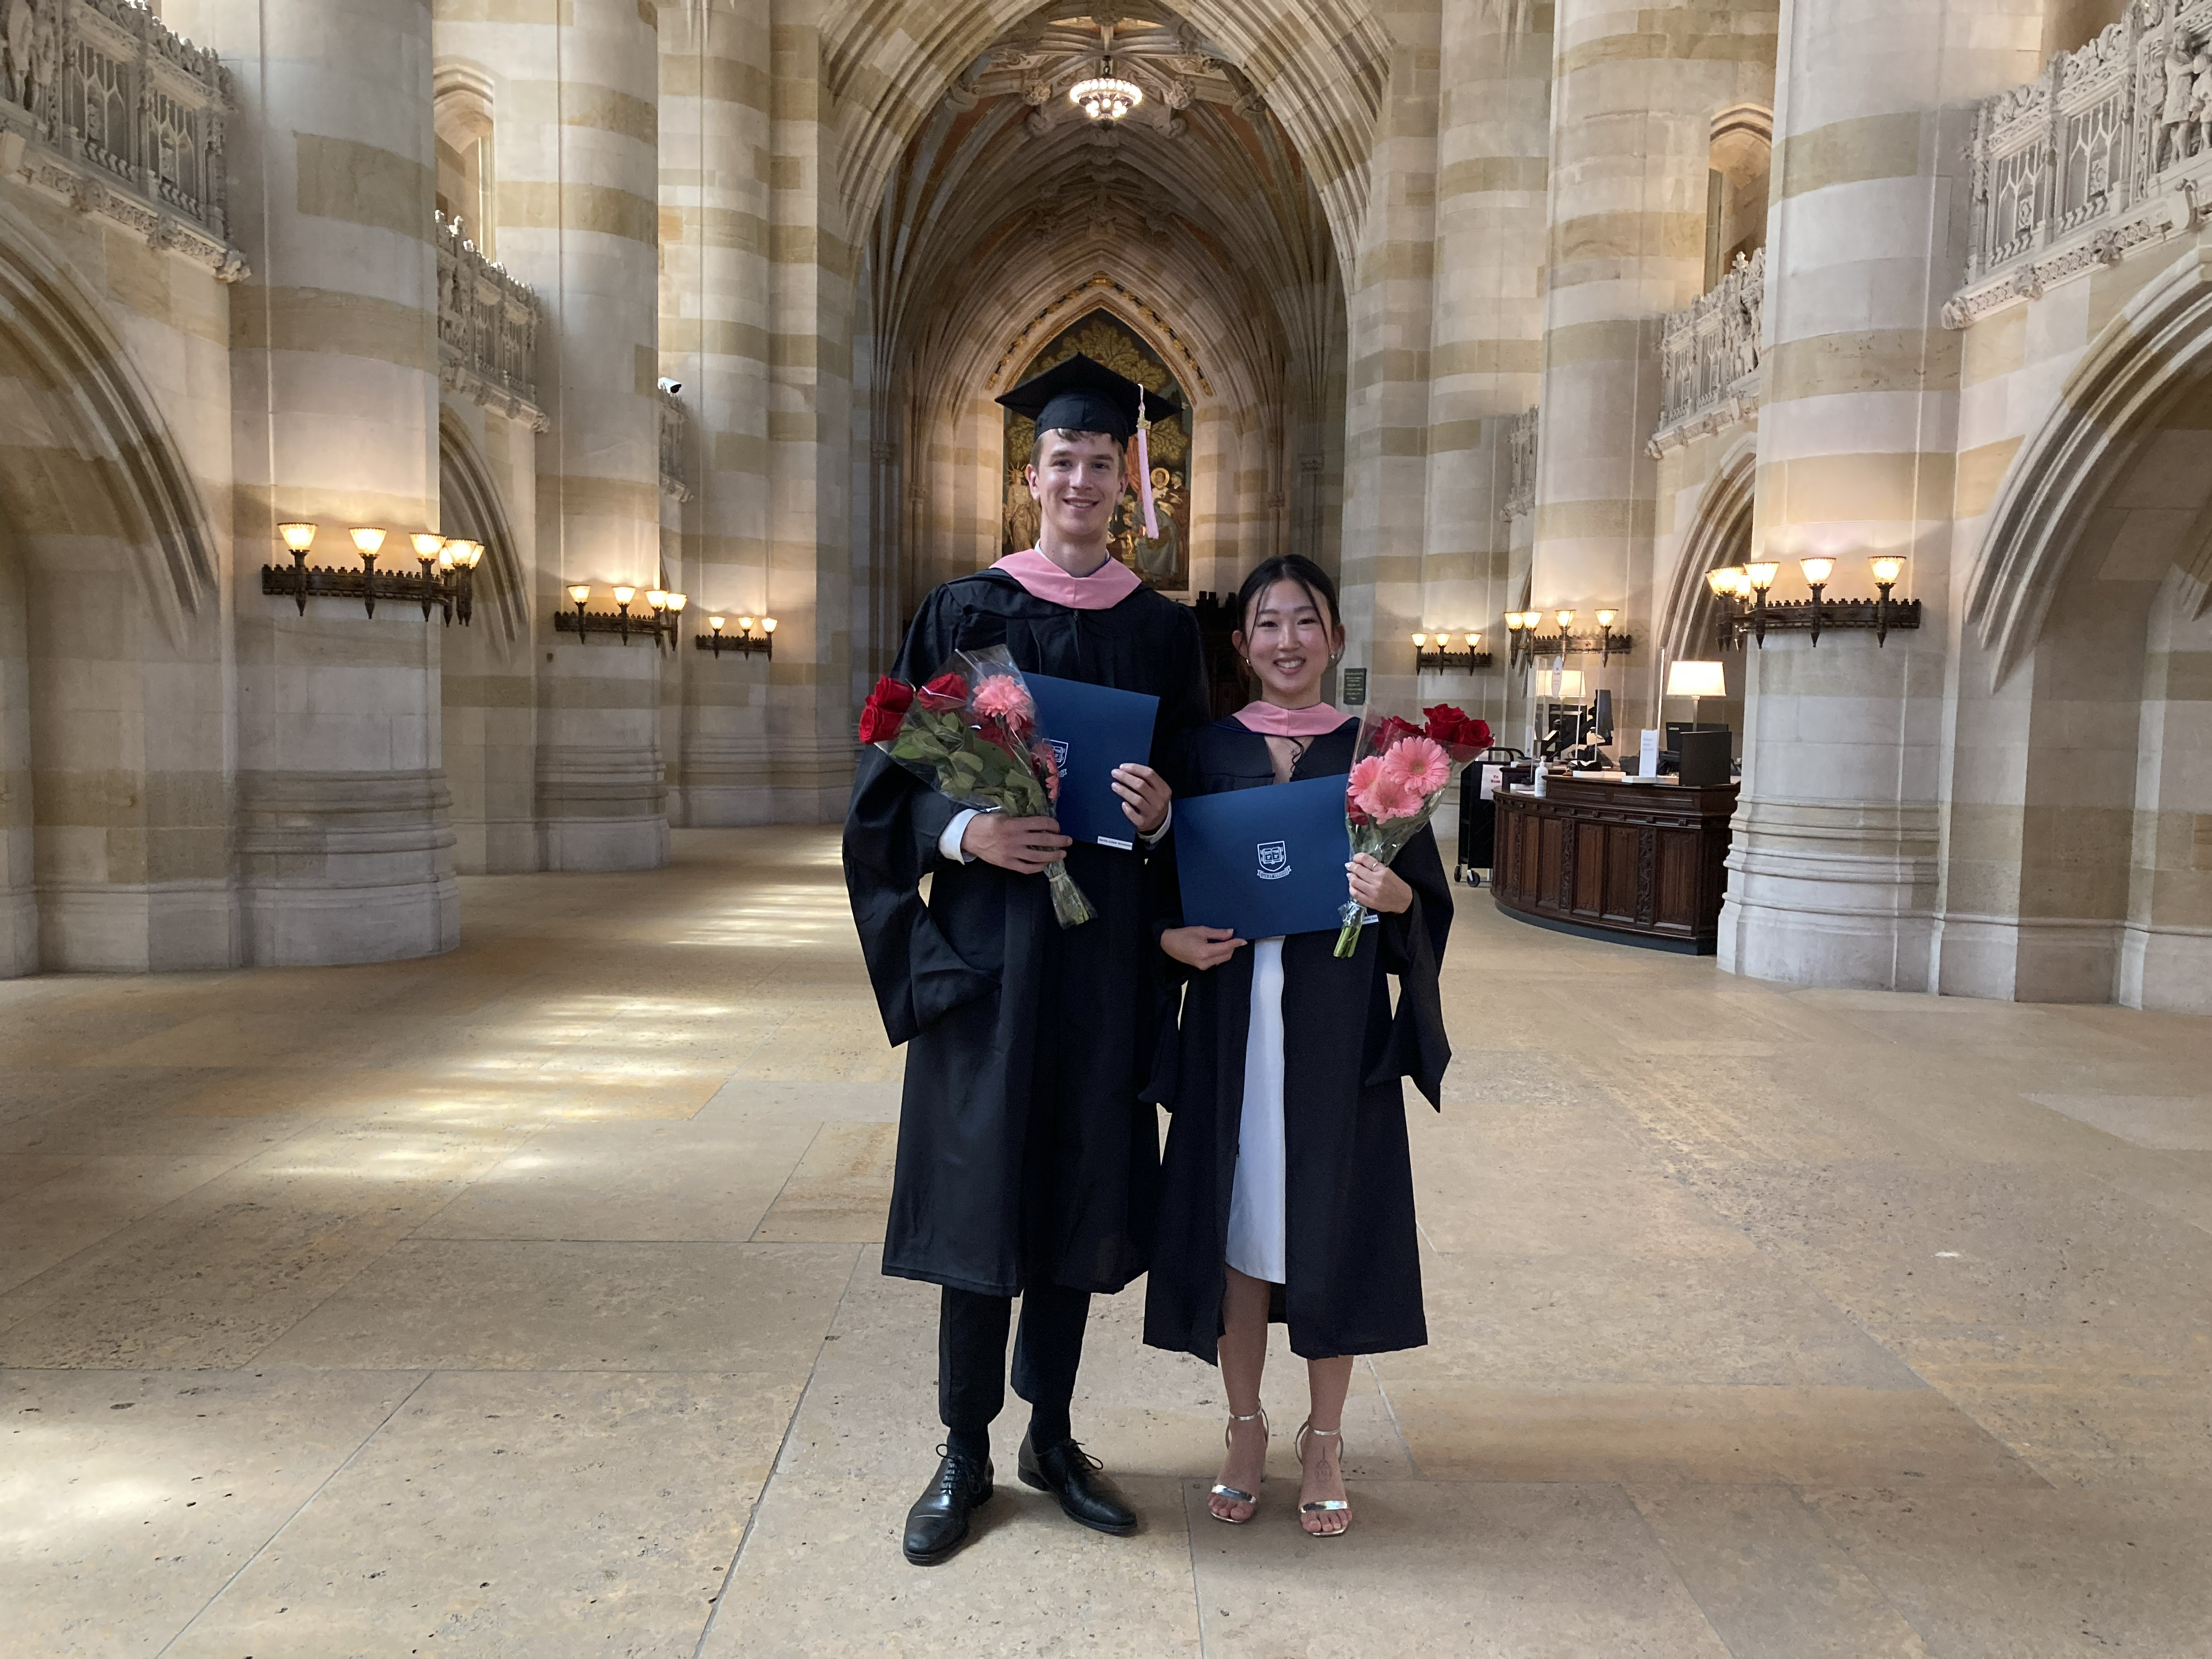 Graduated couple stands in Sterling Nave before painting of Alma Mater. The tall man holds his diploma folder and a bouquet of roses and gerber daisies. The short woman next to him, with black pulled back hair and long side bangs, holds a similar bouquet. Both wear pink stoles and she is wearing a white dress beneath her partially open gown and silver strap sandals.